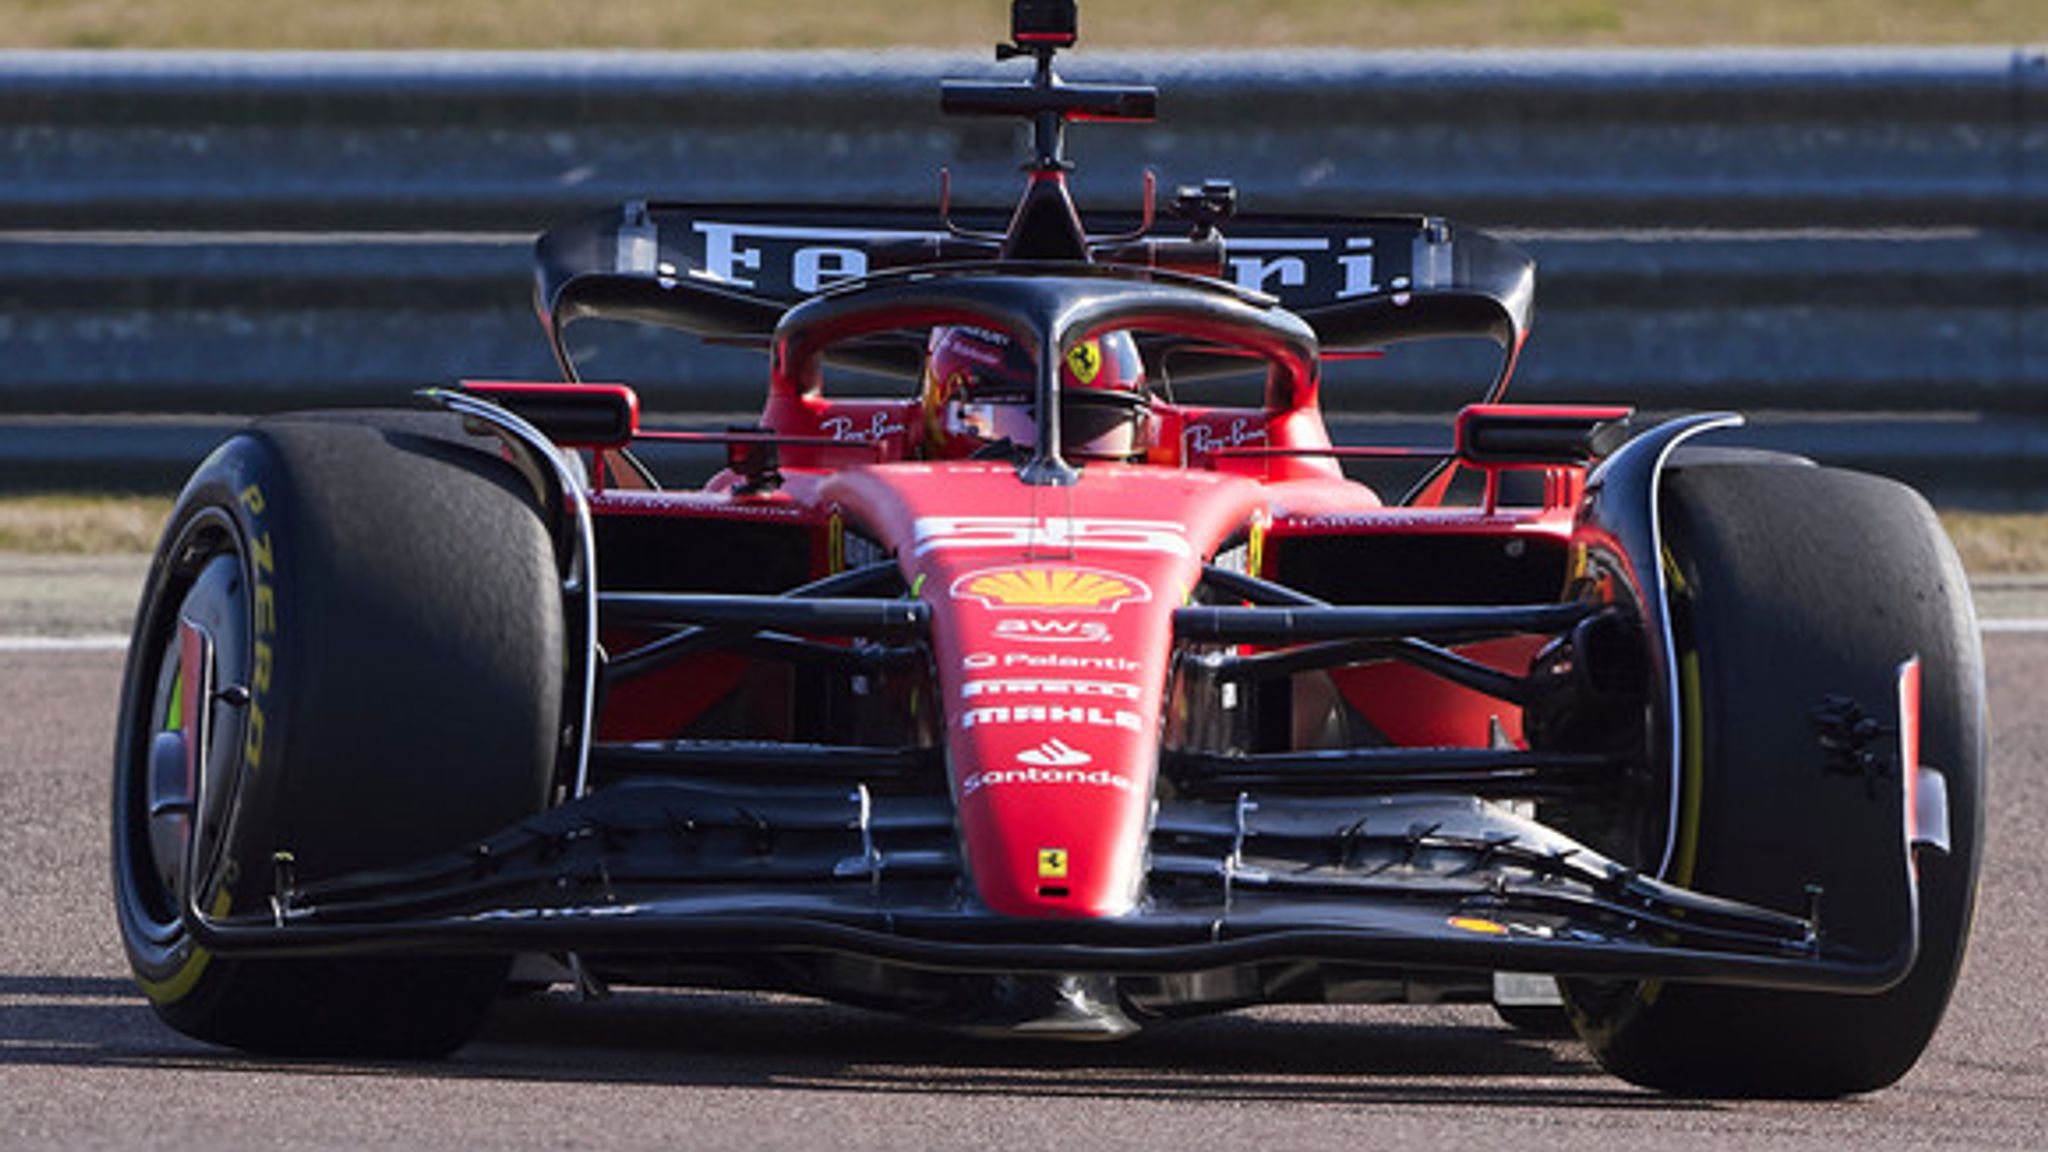 Ferrari reveals new F1-75 car for 2022 with red and black livery